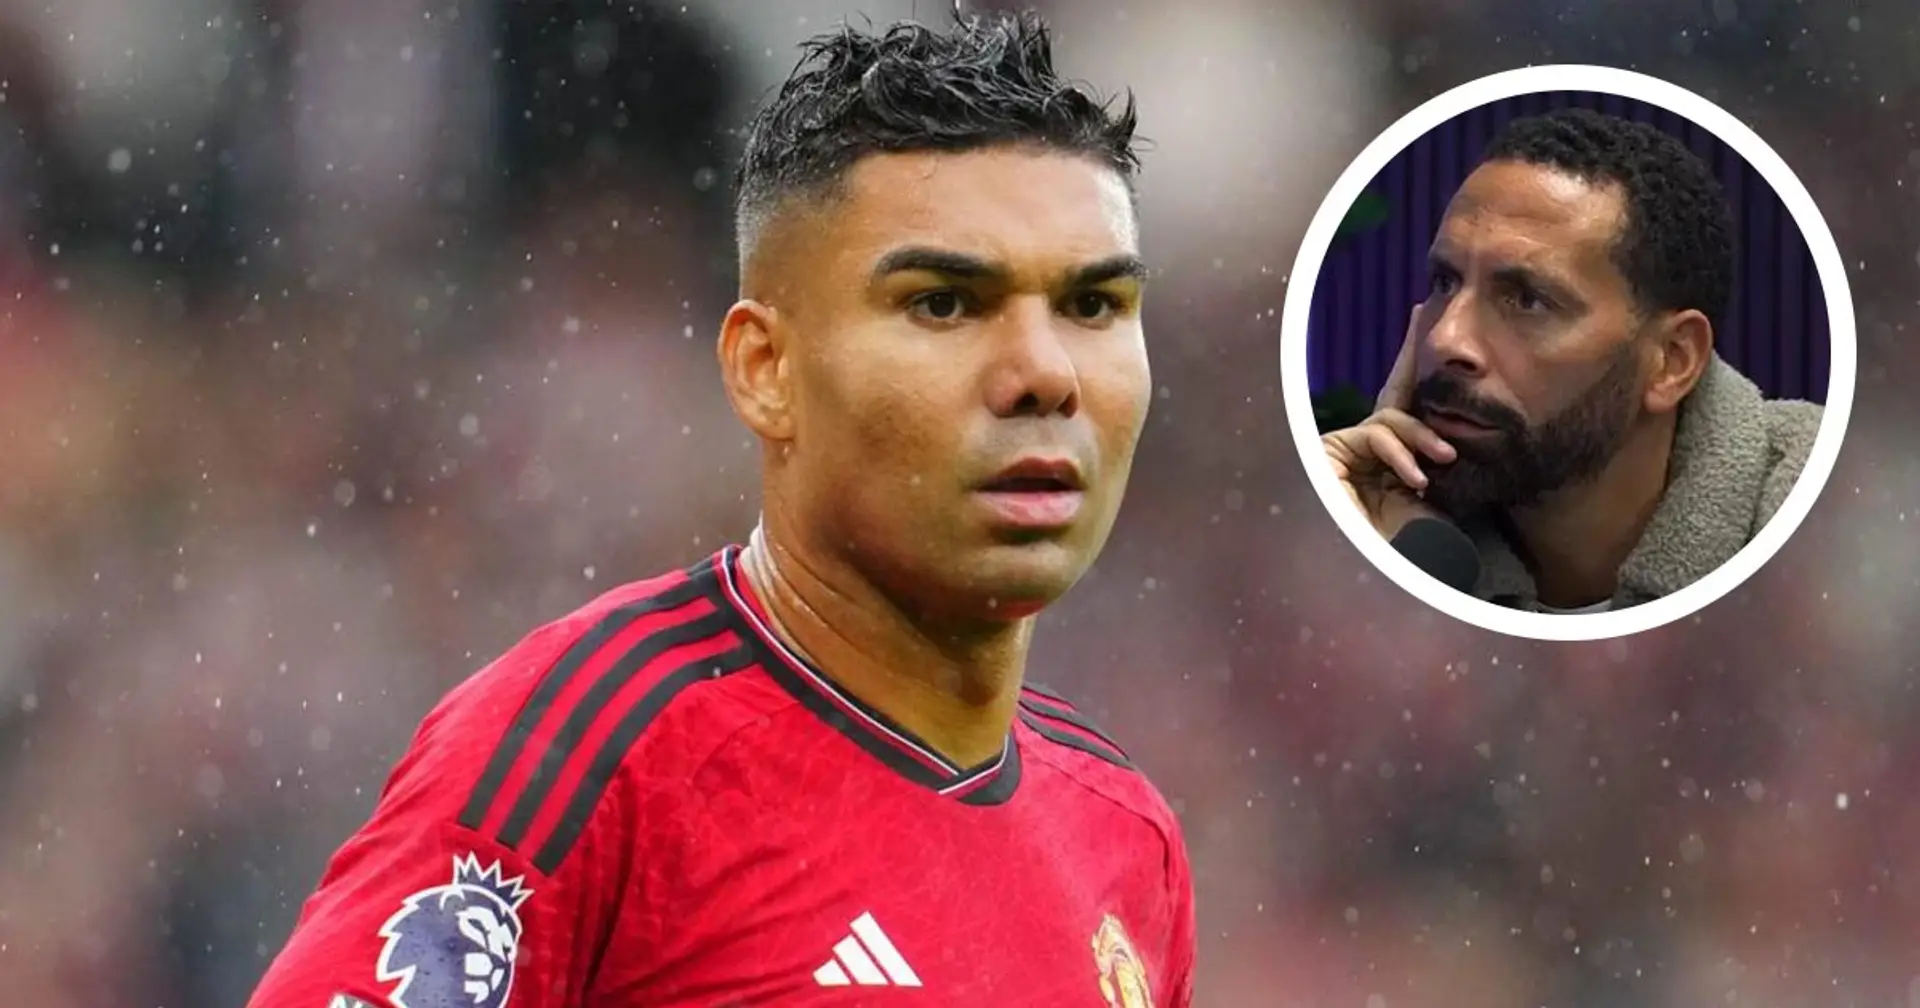 'You can't keep doing that': Rio Ferdinand delivers warning to Casemiro after Everton clash